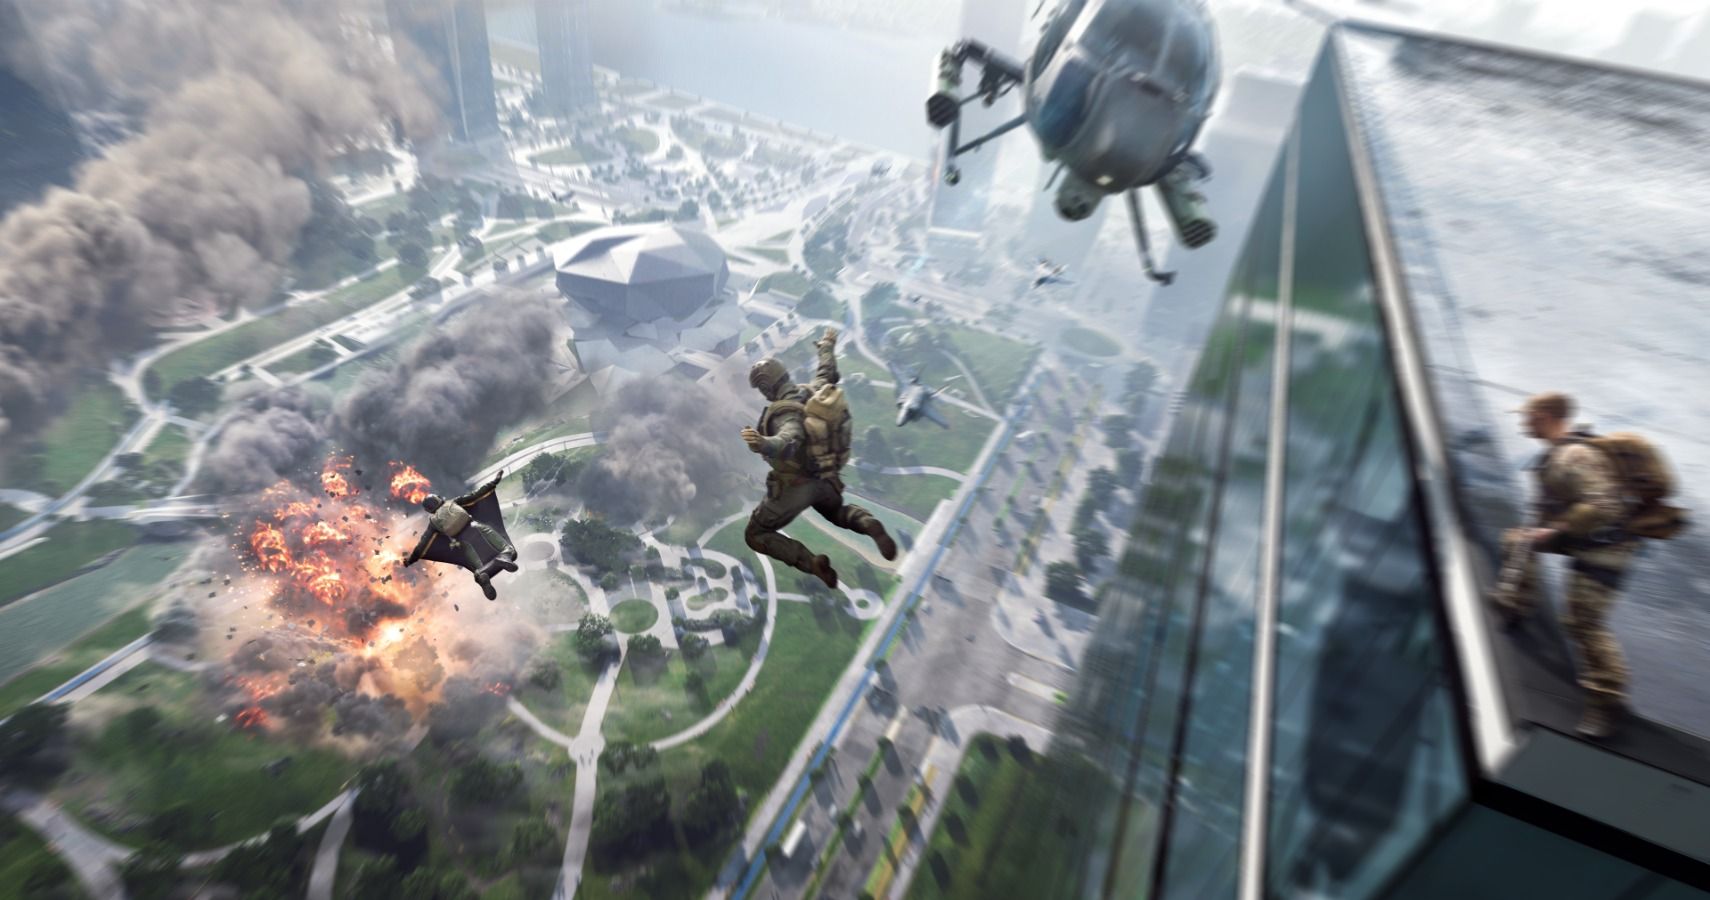 Soldiers parachute from a rooftop as a helicopter flies overhead in Battlefield 2042